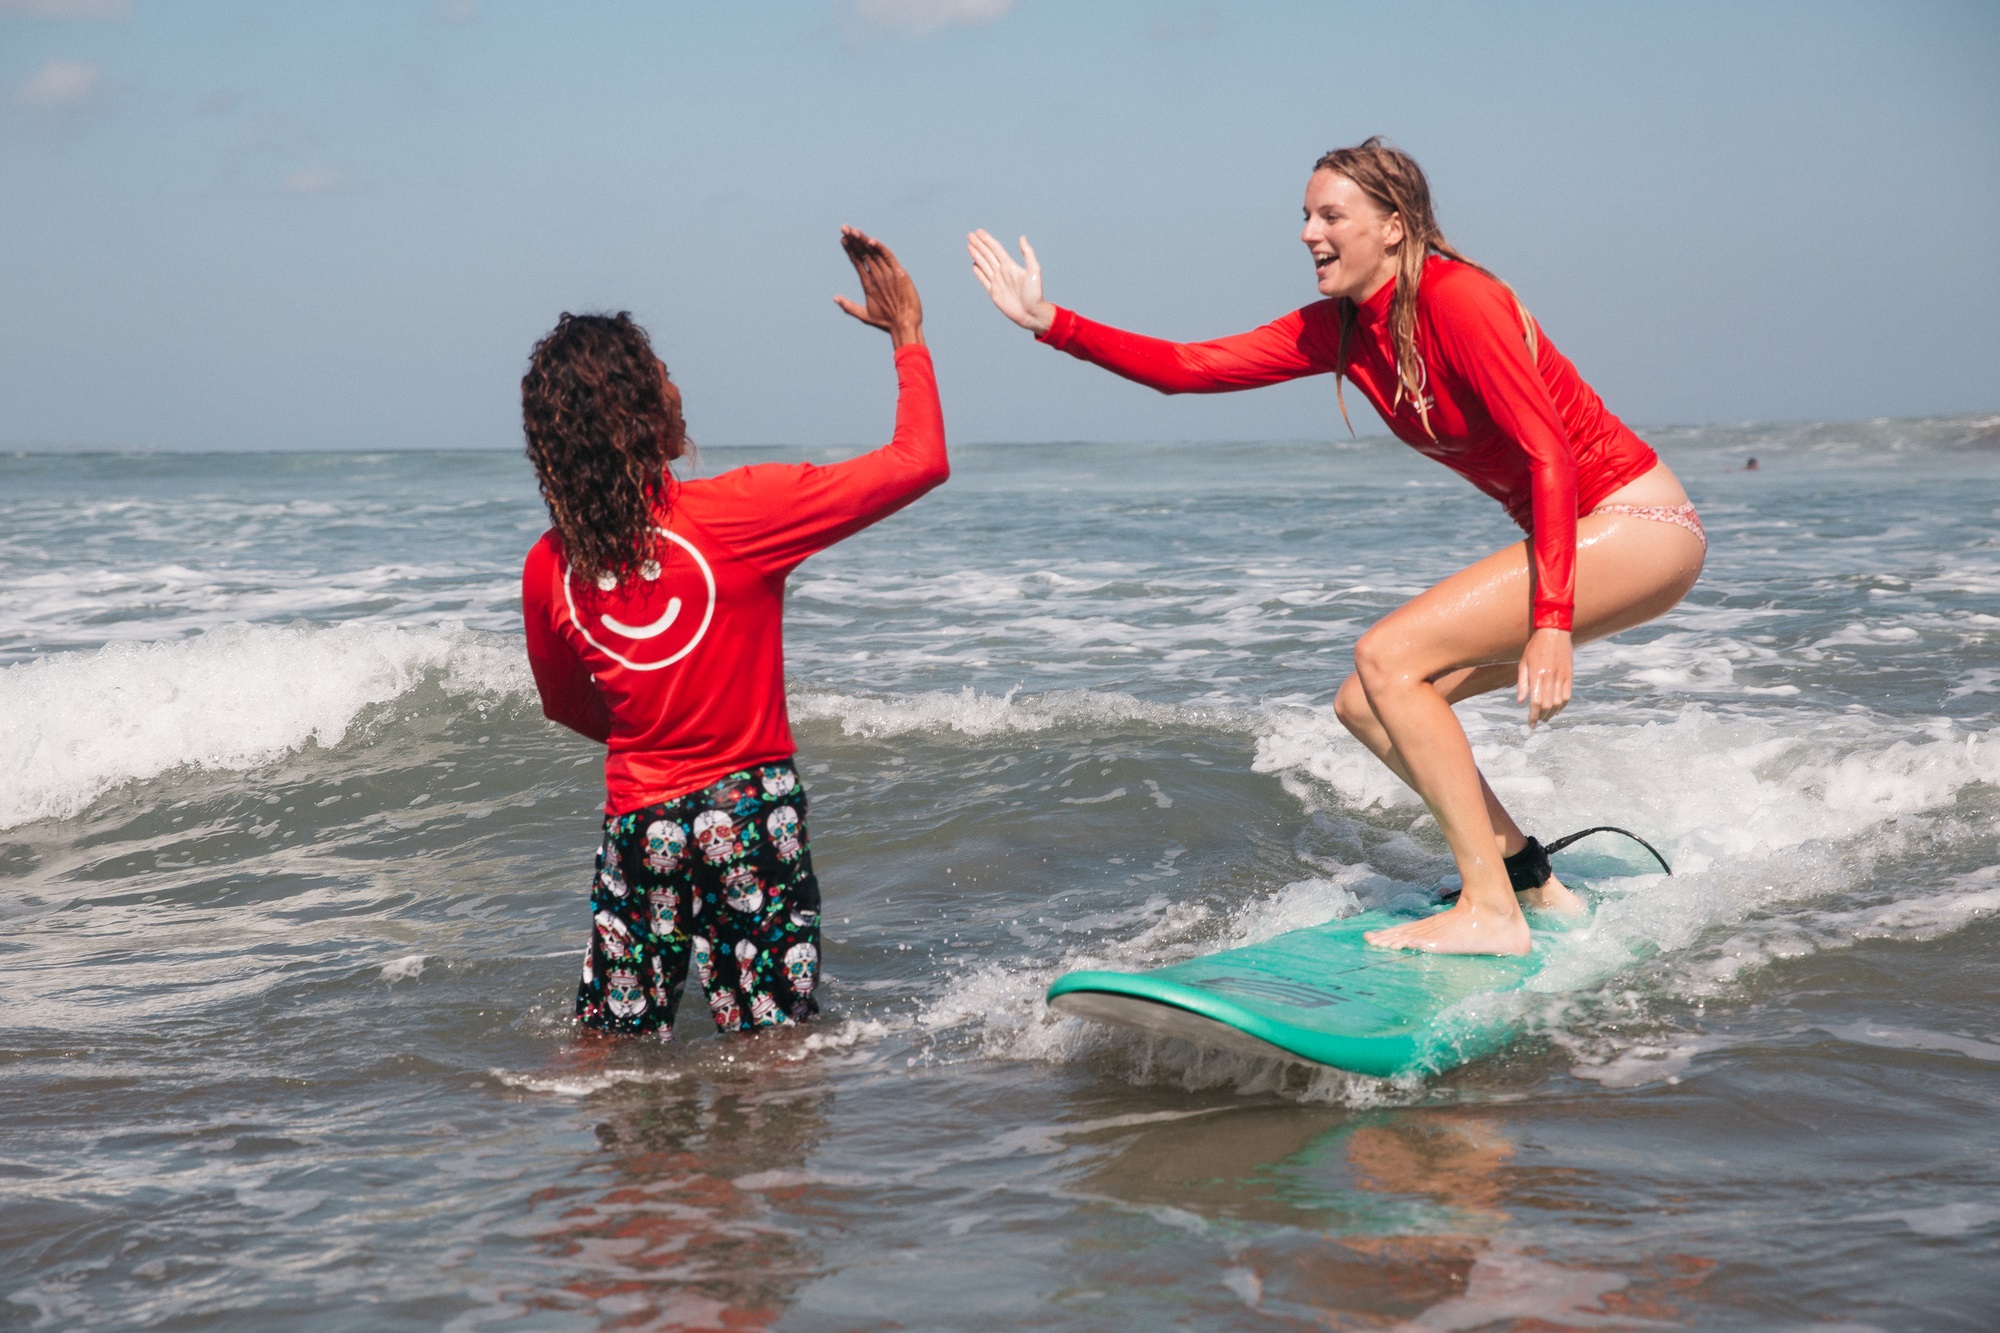 A surfer with black skin and long brown dreads and a surfer with white skin and long brown hair both in red rash guard UPF shirts high fiving in the waves